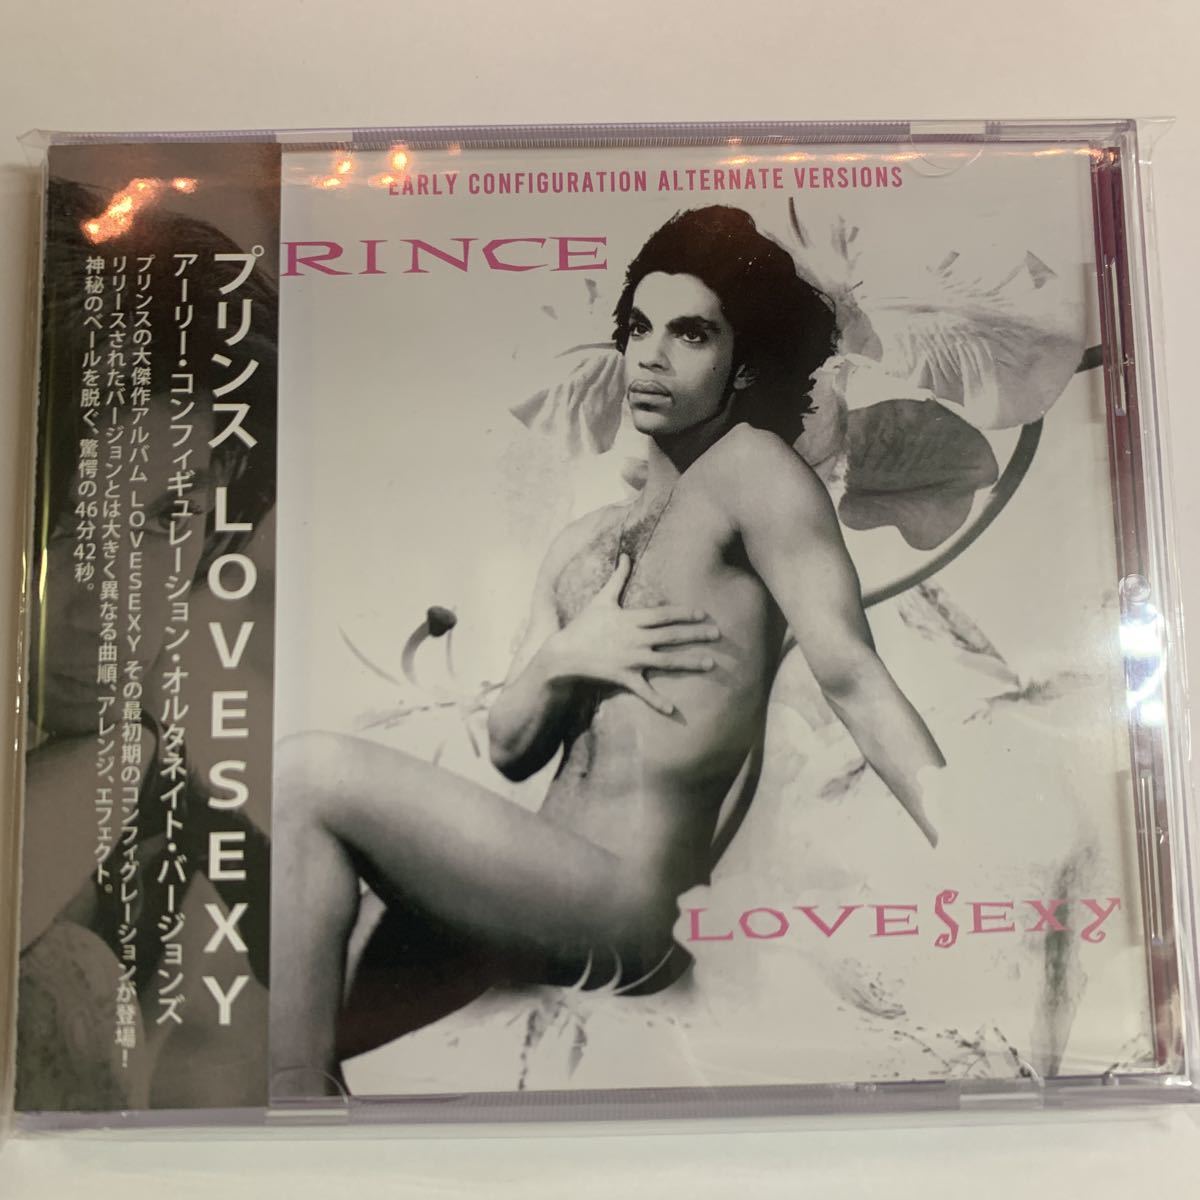 Prince   Lovesexy “Early Configuration Alternate Versions” 神秘のヴェイルを脱ぐプロトタイプ・ラヴセクシー！